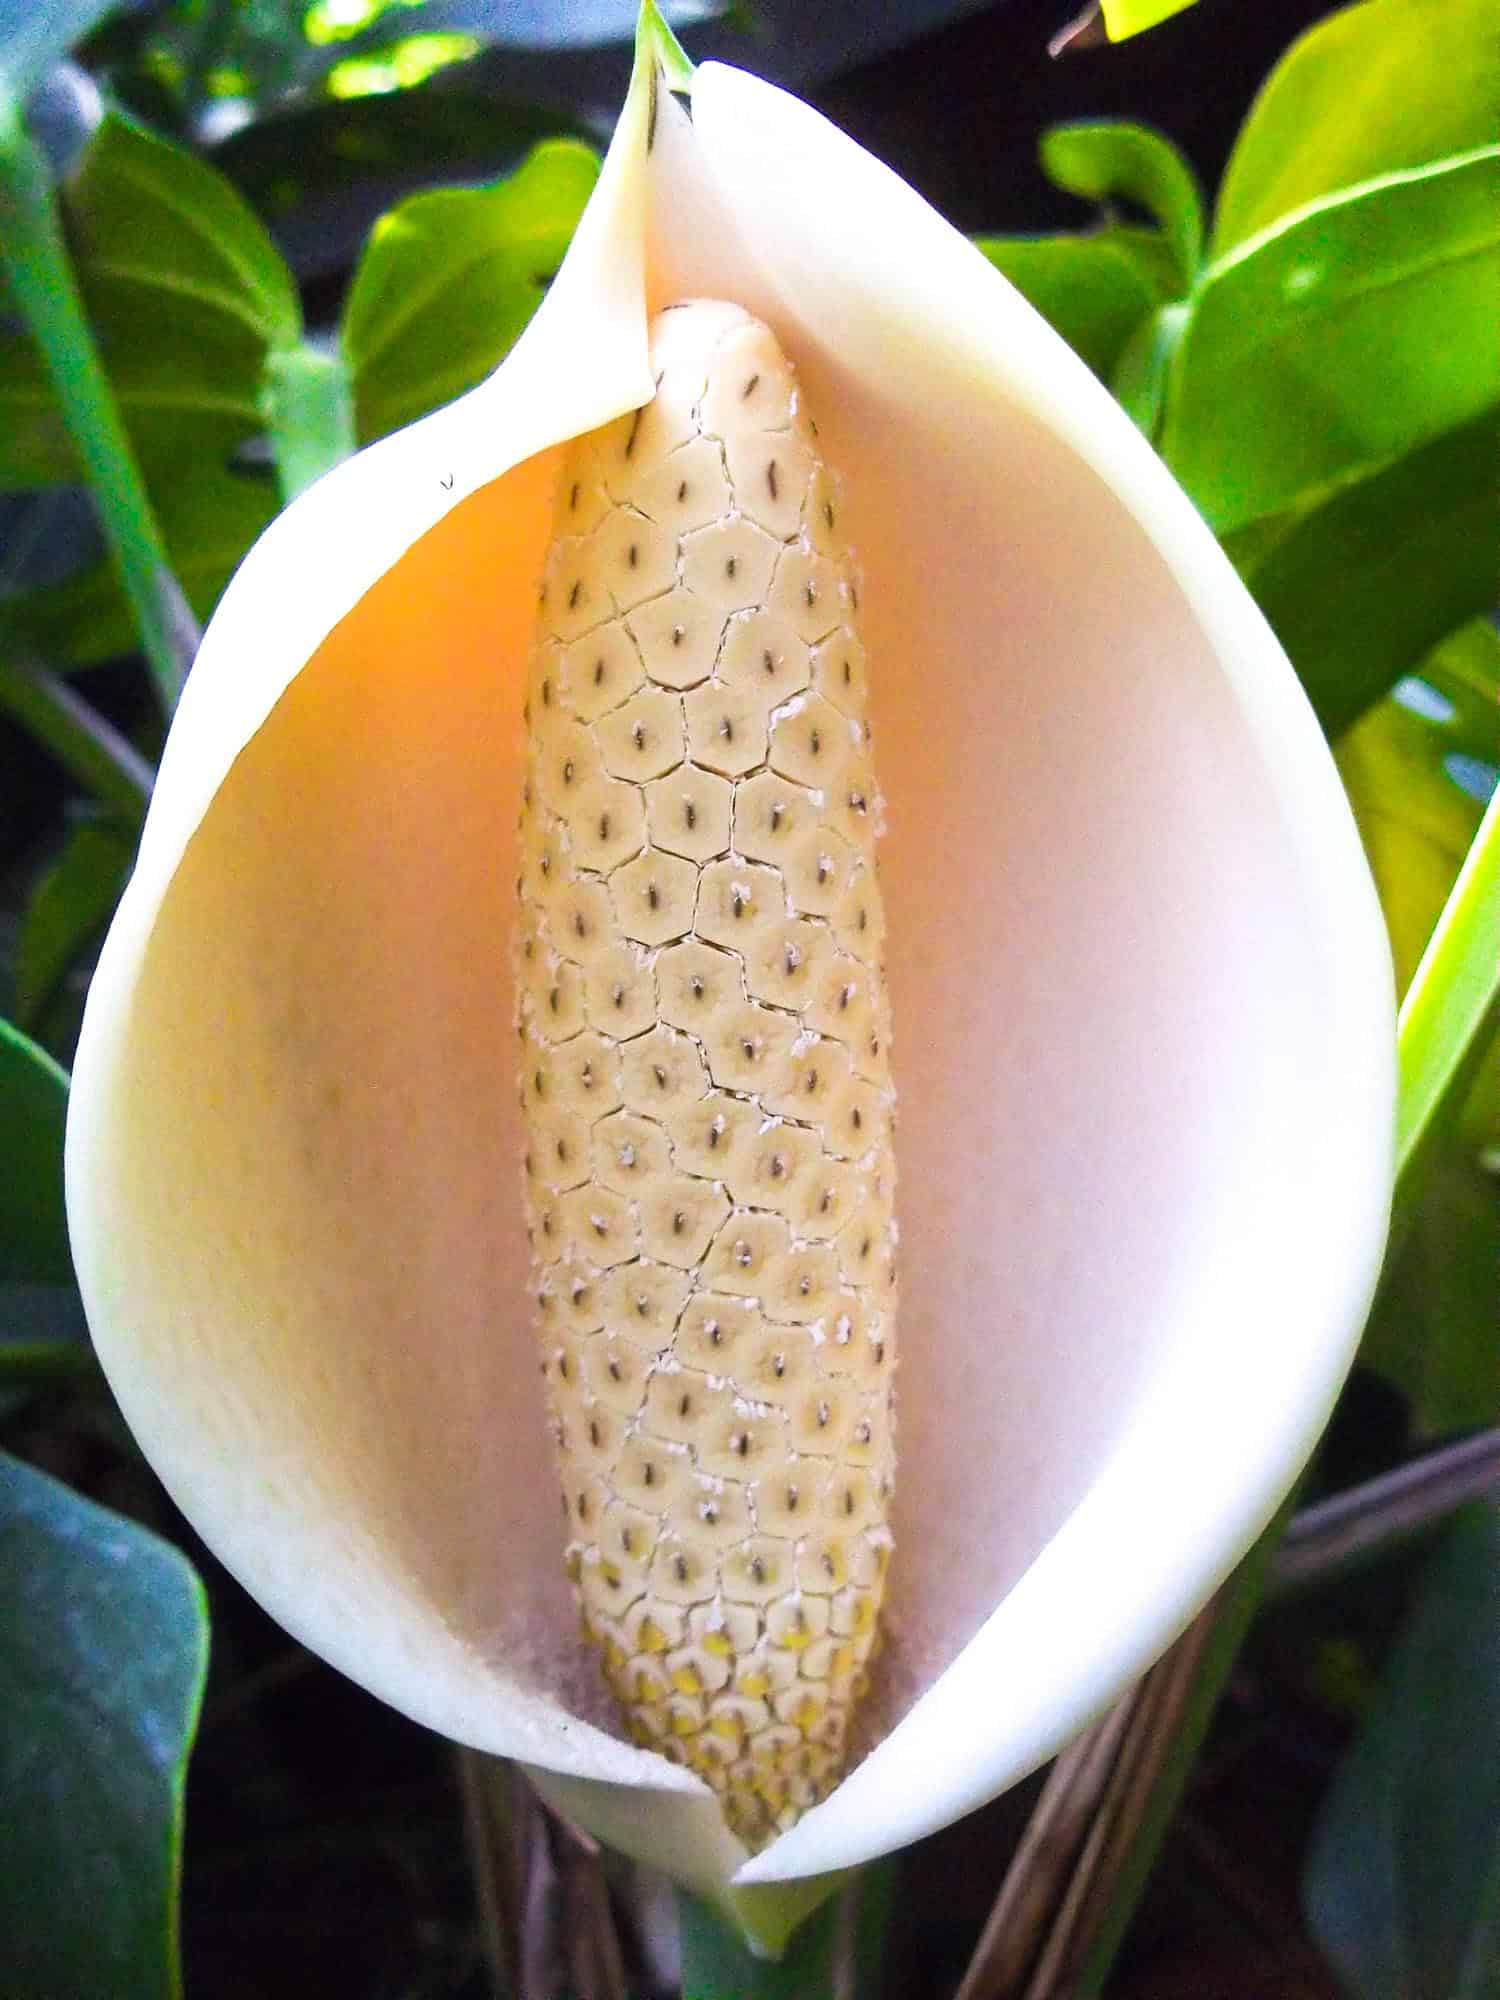 Monstera Deliciosa, aka the Swiss cheese plant, is one of the exotic fruits found in Colombia, Ecuador and Panama.